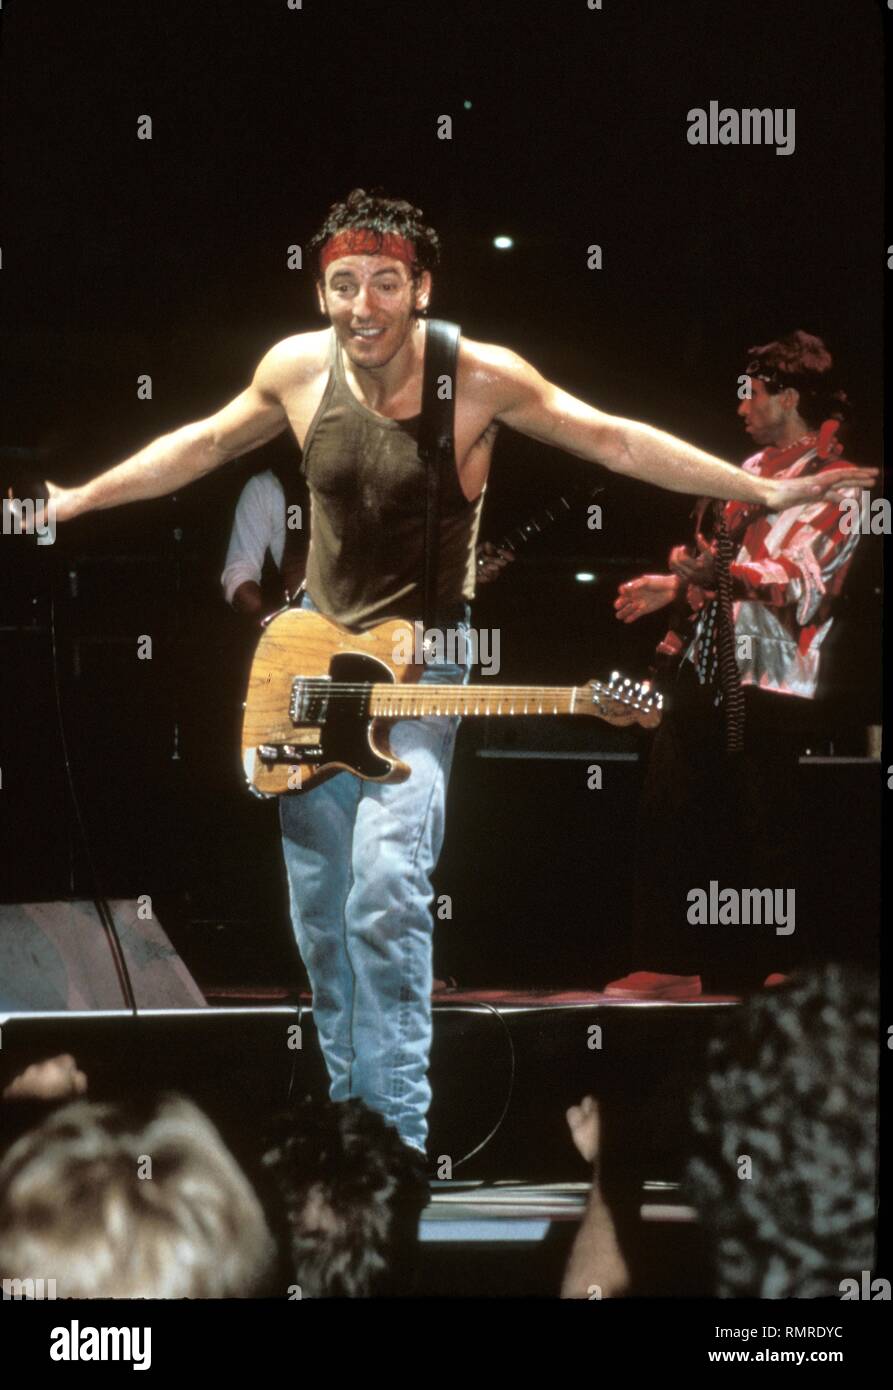 SInger, songwriter & guitarist Springsteen, nicknamed Boss", is performing on during a "live" concert appearance Stock Photo - Alamy